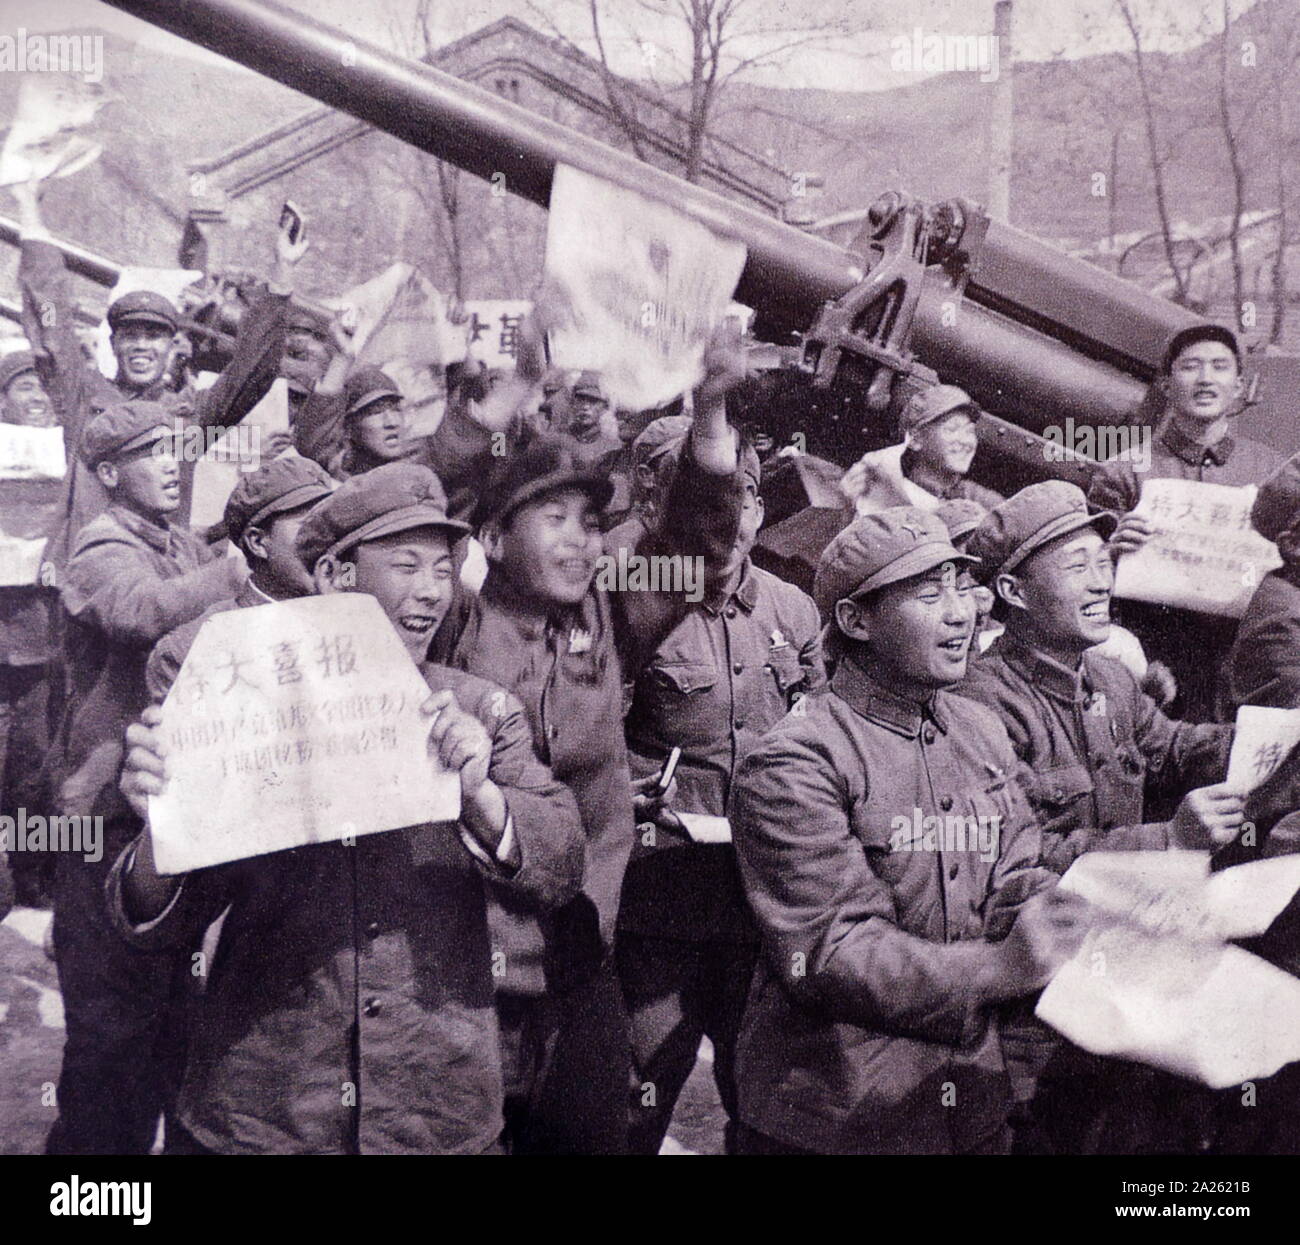 People's Liberation Army Artillery Corps, holding slogans supporting the communist party of China 1967 Stock Photo